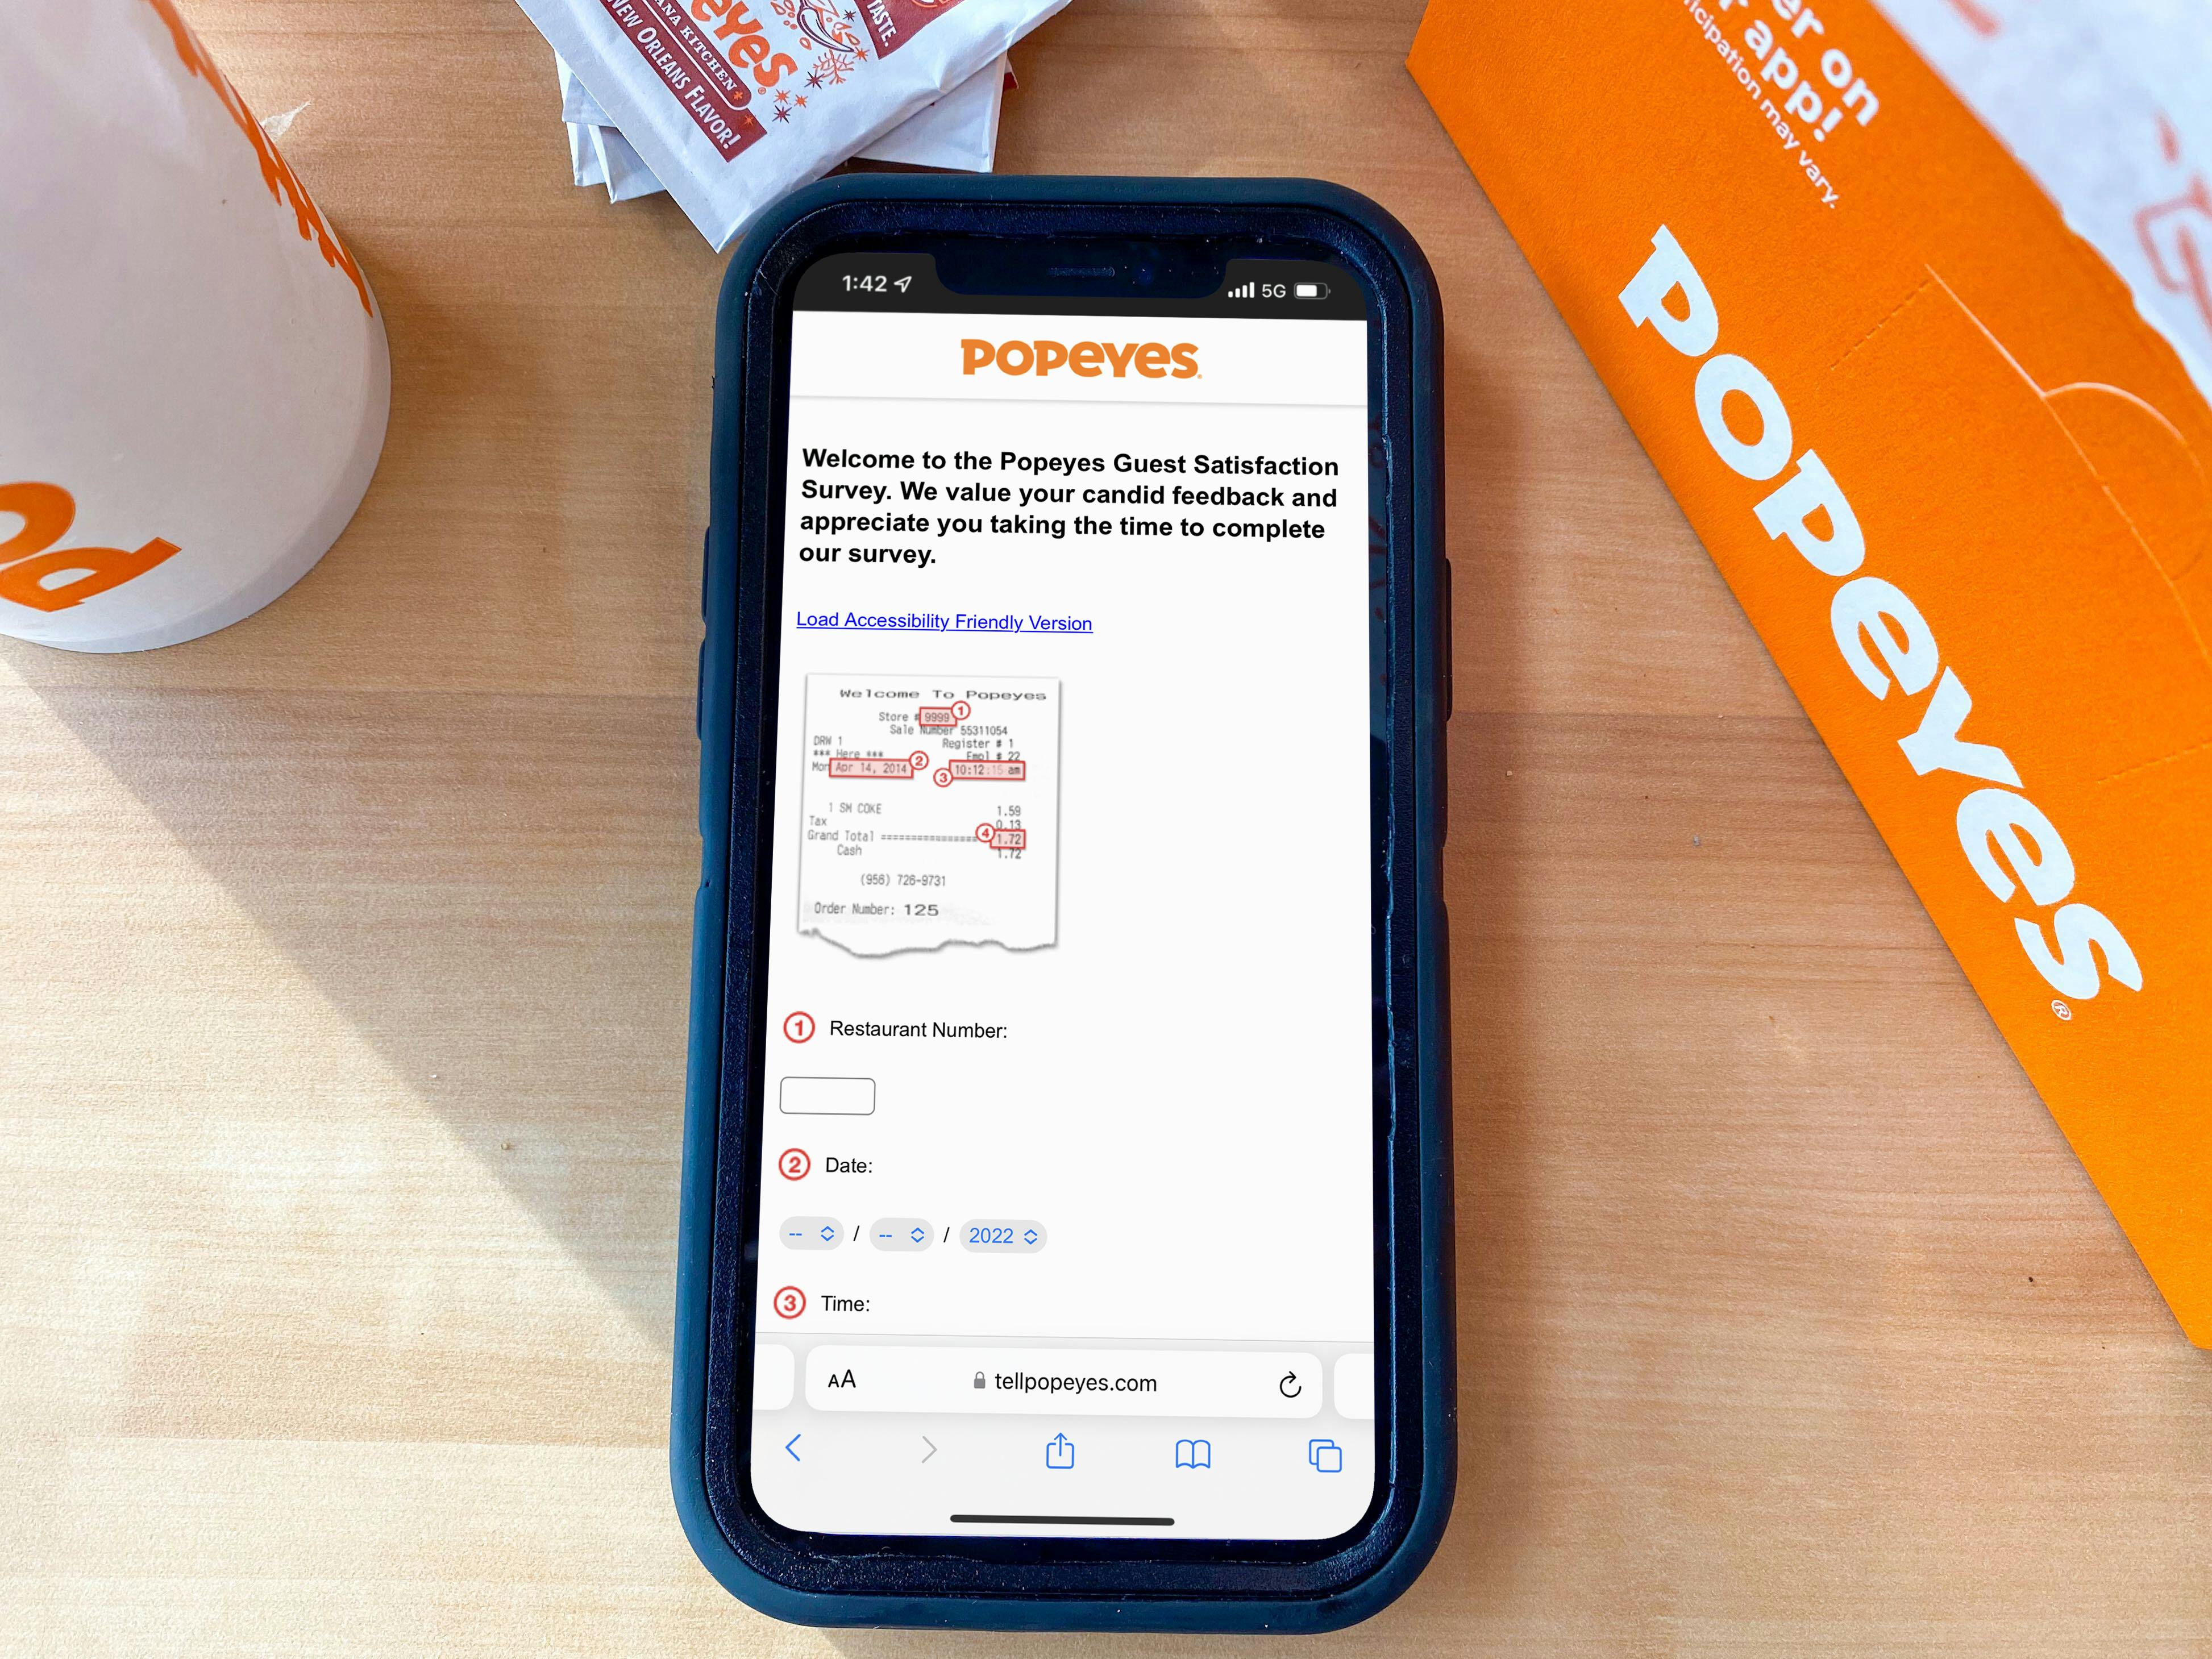 A Popeyes survey displayed on an iPhone that is on a table next to some Popeyes food containers.